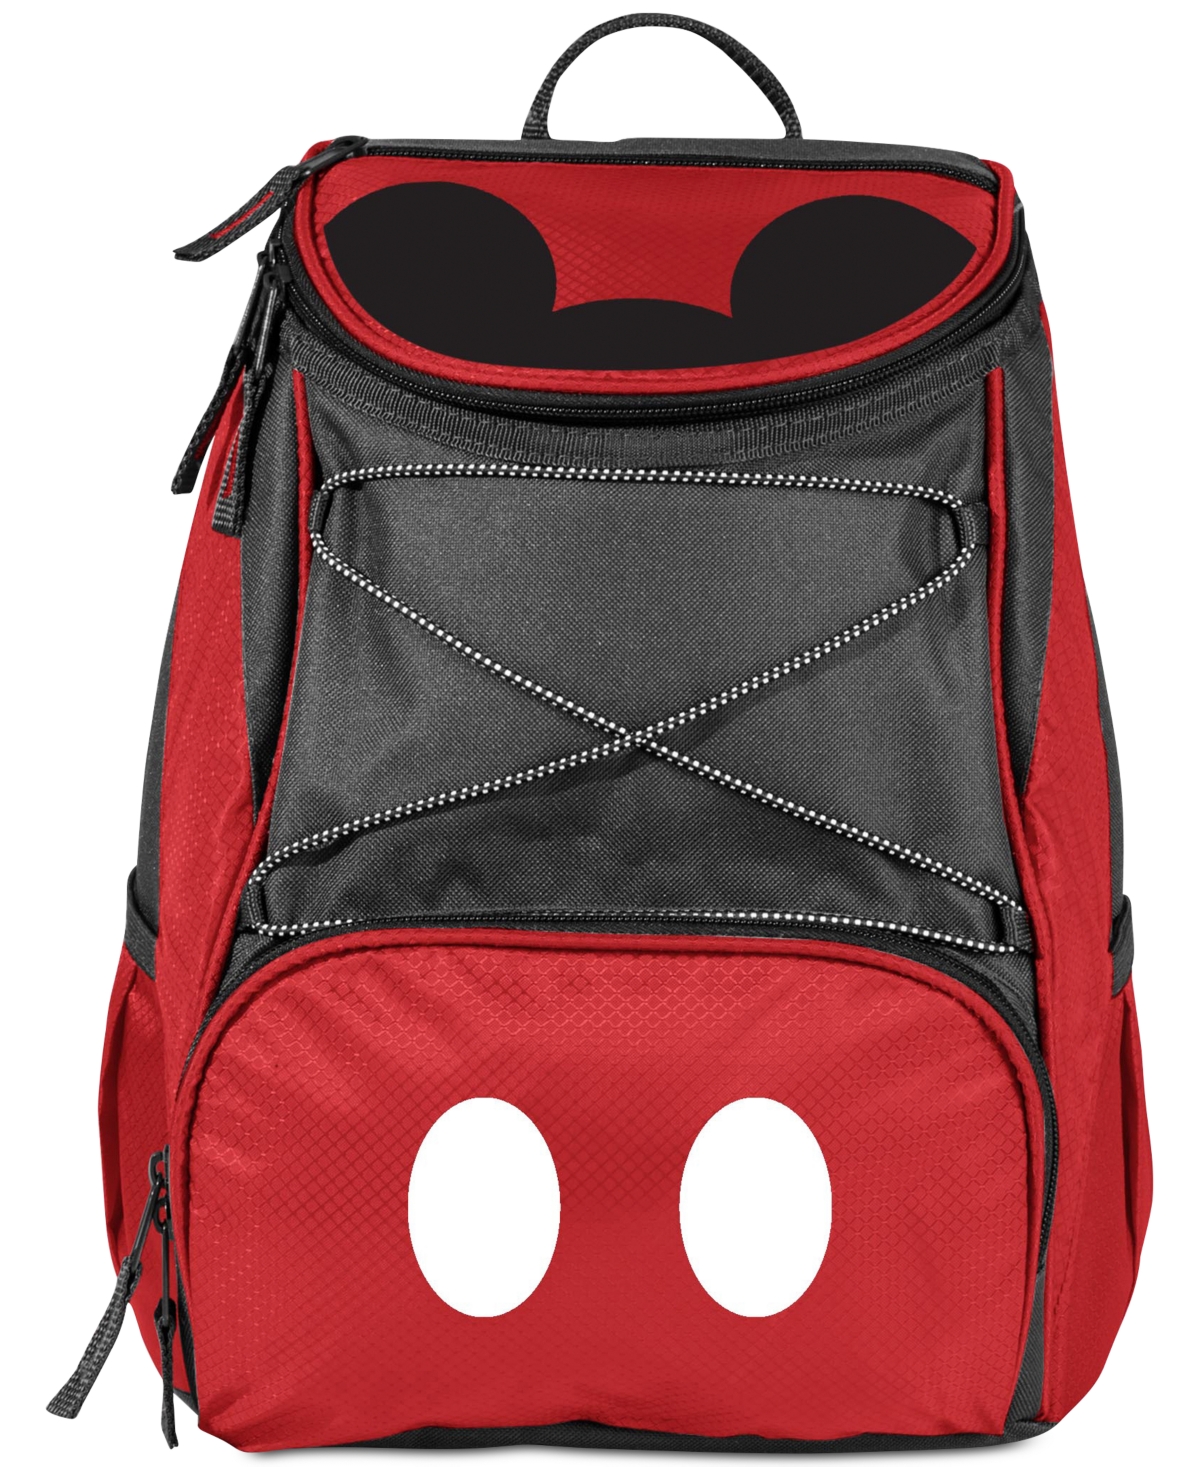 Disney's Mickey Mouse Ptx Cooler Backpack - Red